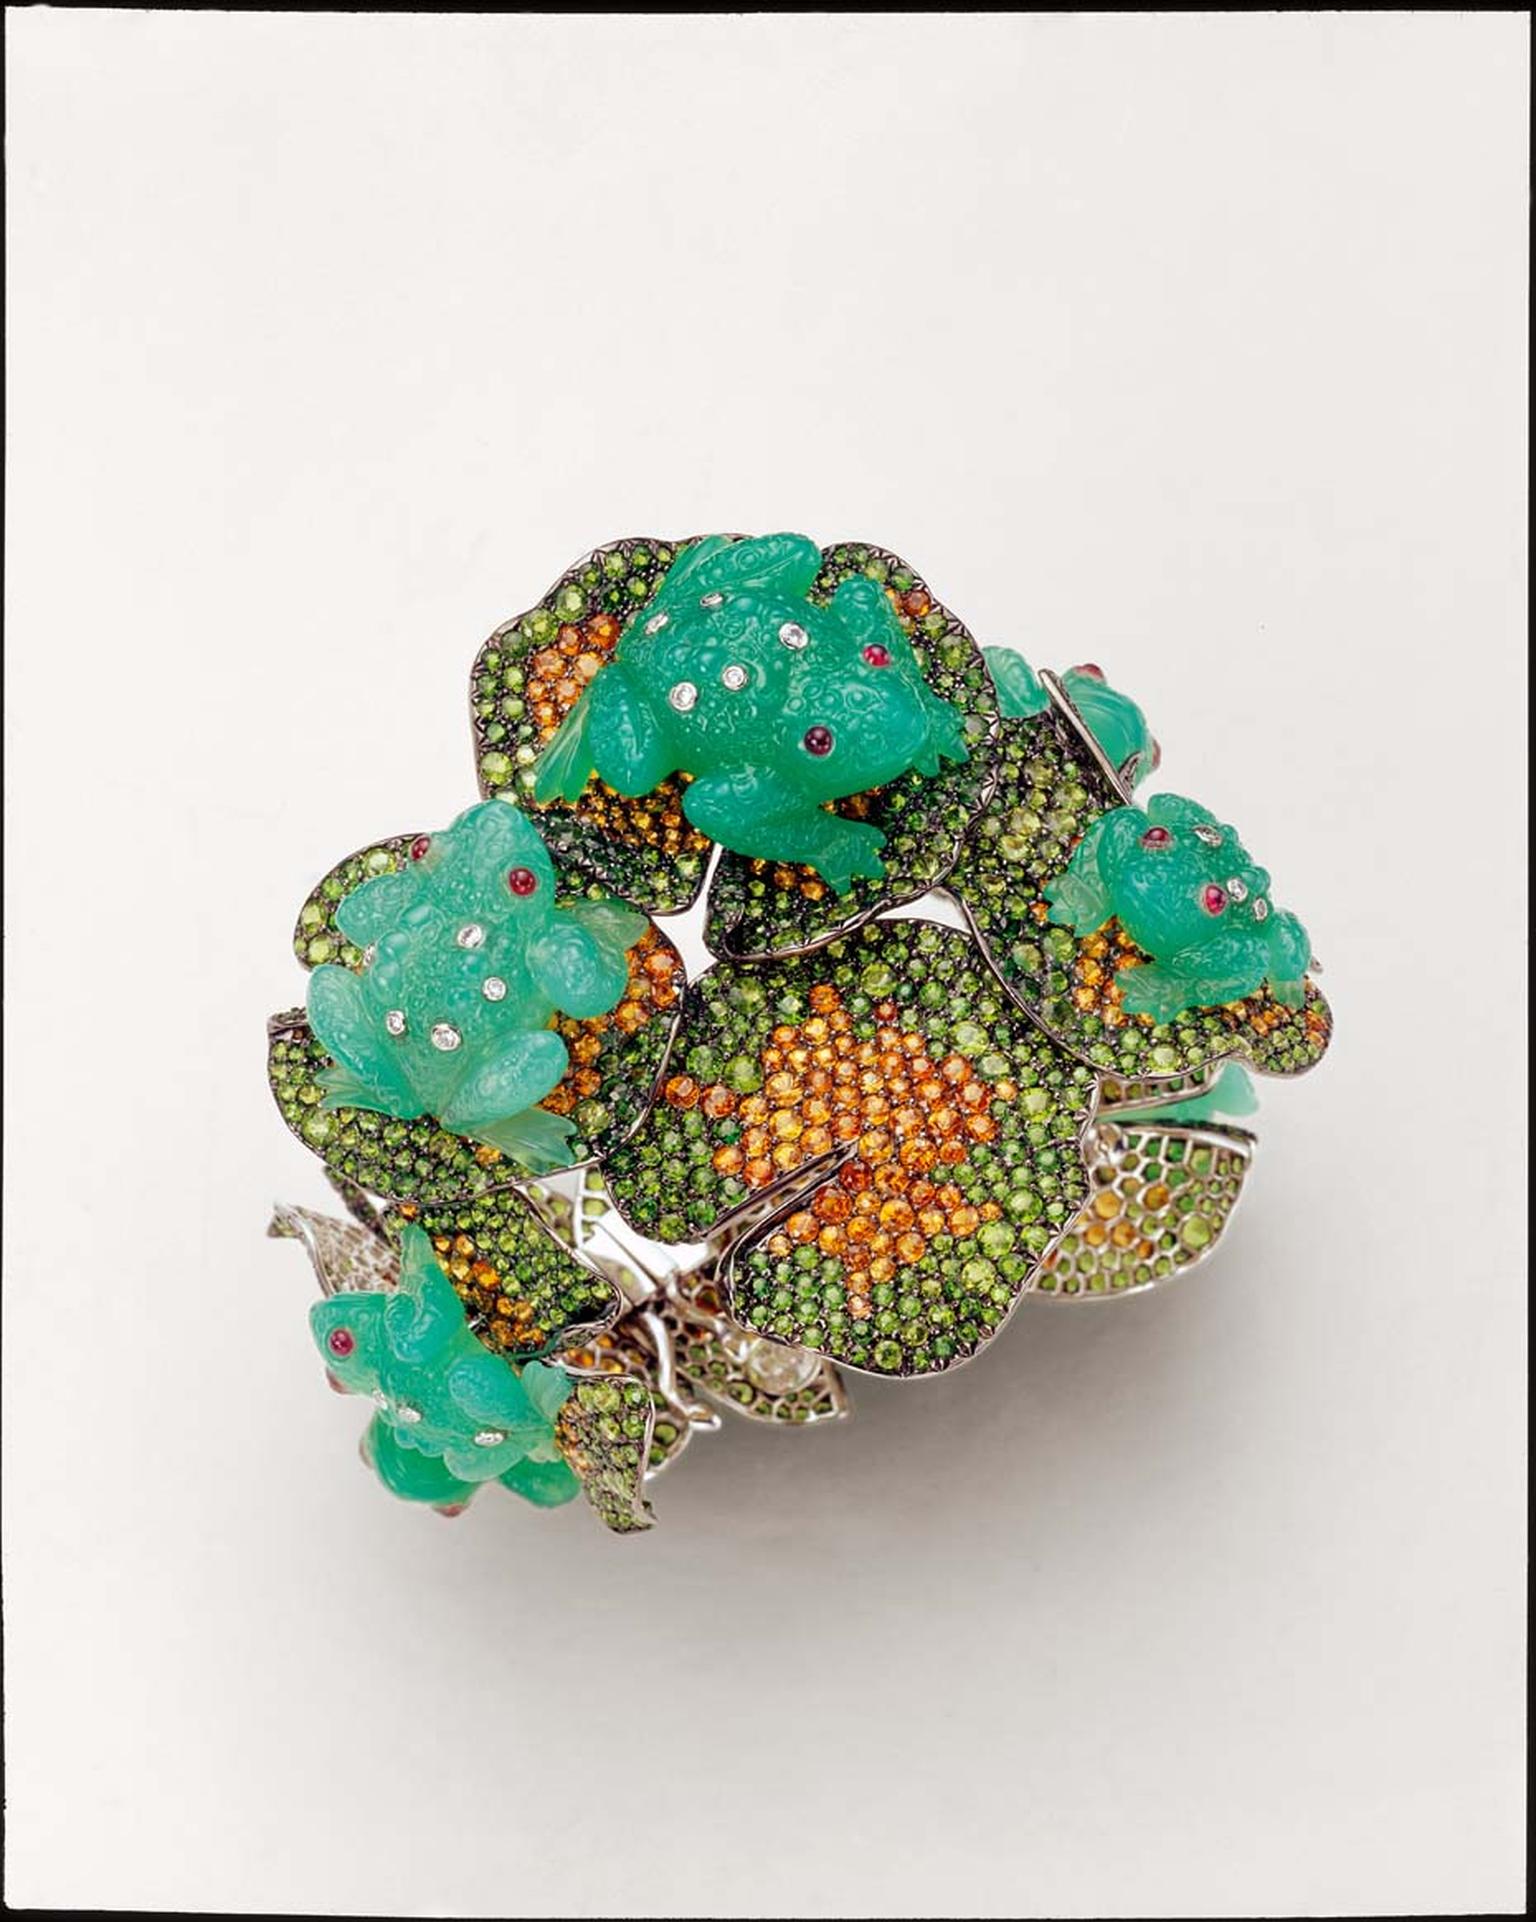 Suzanne Syz Prince Charming bangle set in white gold featuring four chyrosprase frogs, 48.88ct of tsavorites, 46.08ct of garnets, diamonds and cabochon rubies.